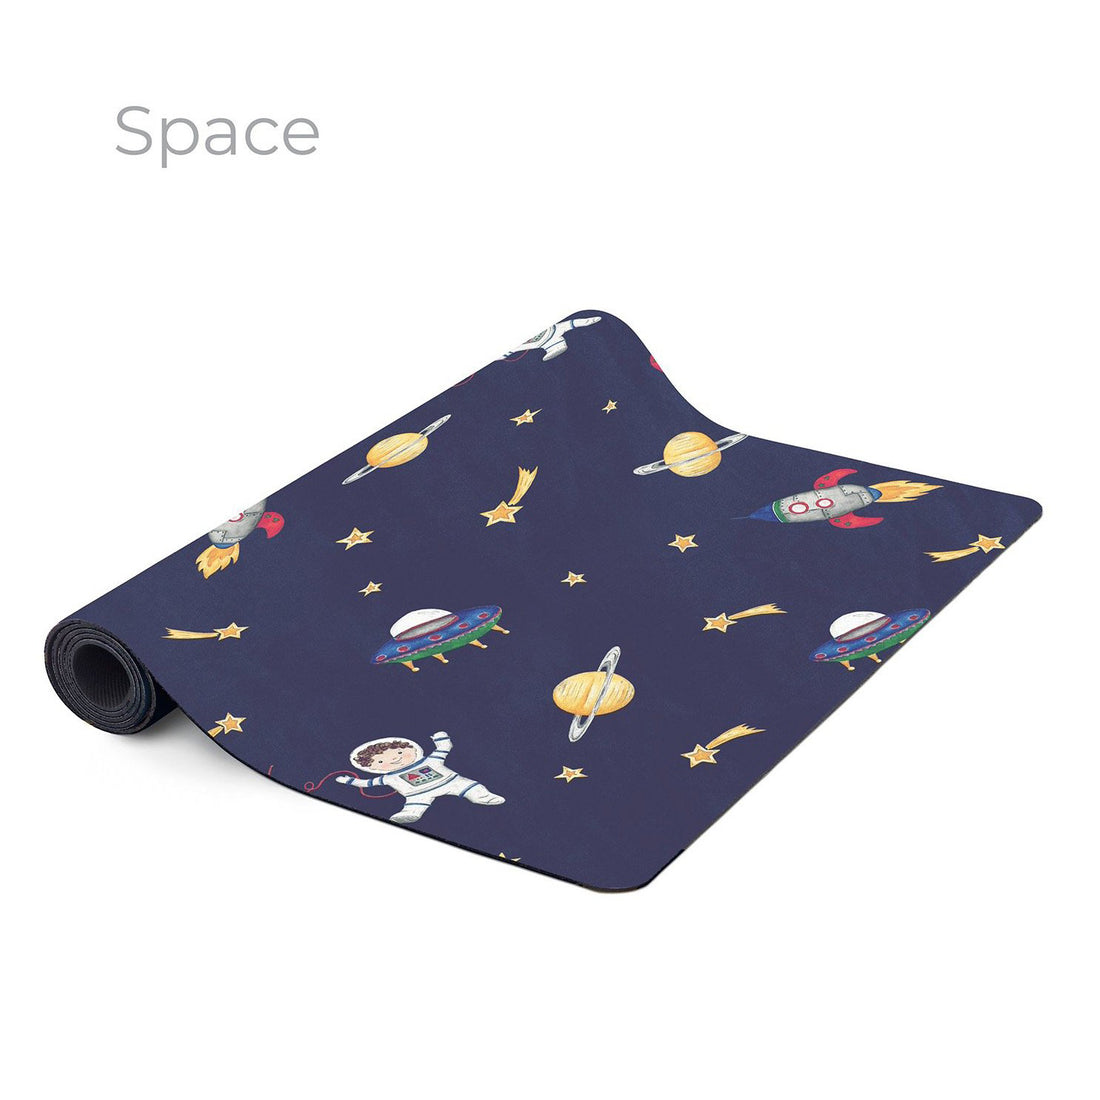 mindful-&-co-kids-luxe-kids-yoga-mats-space- (1)